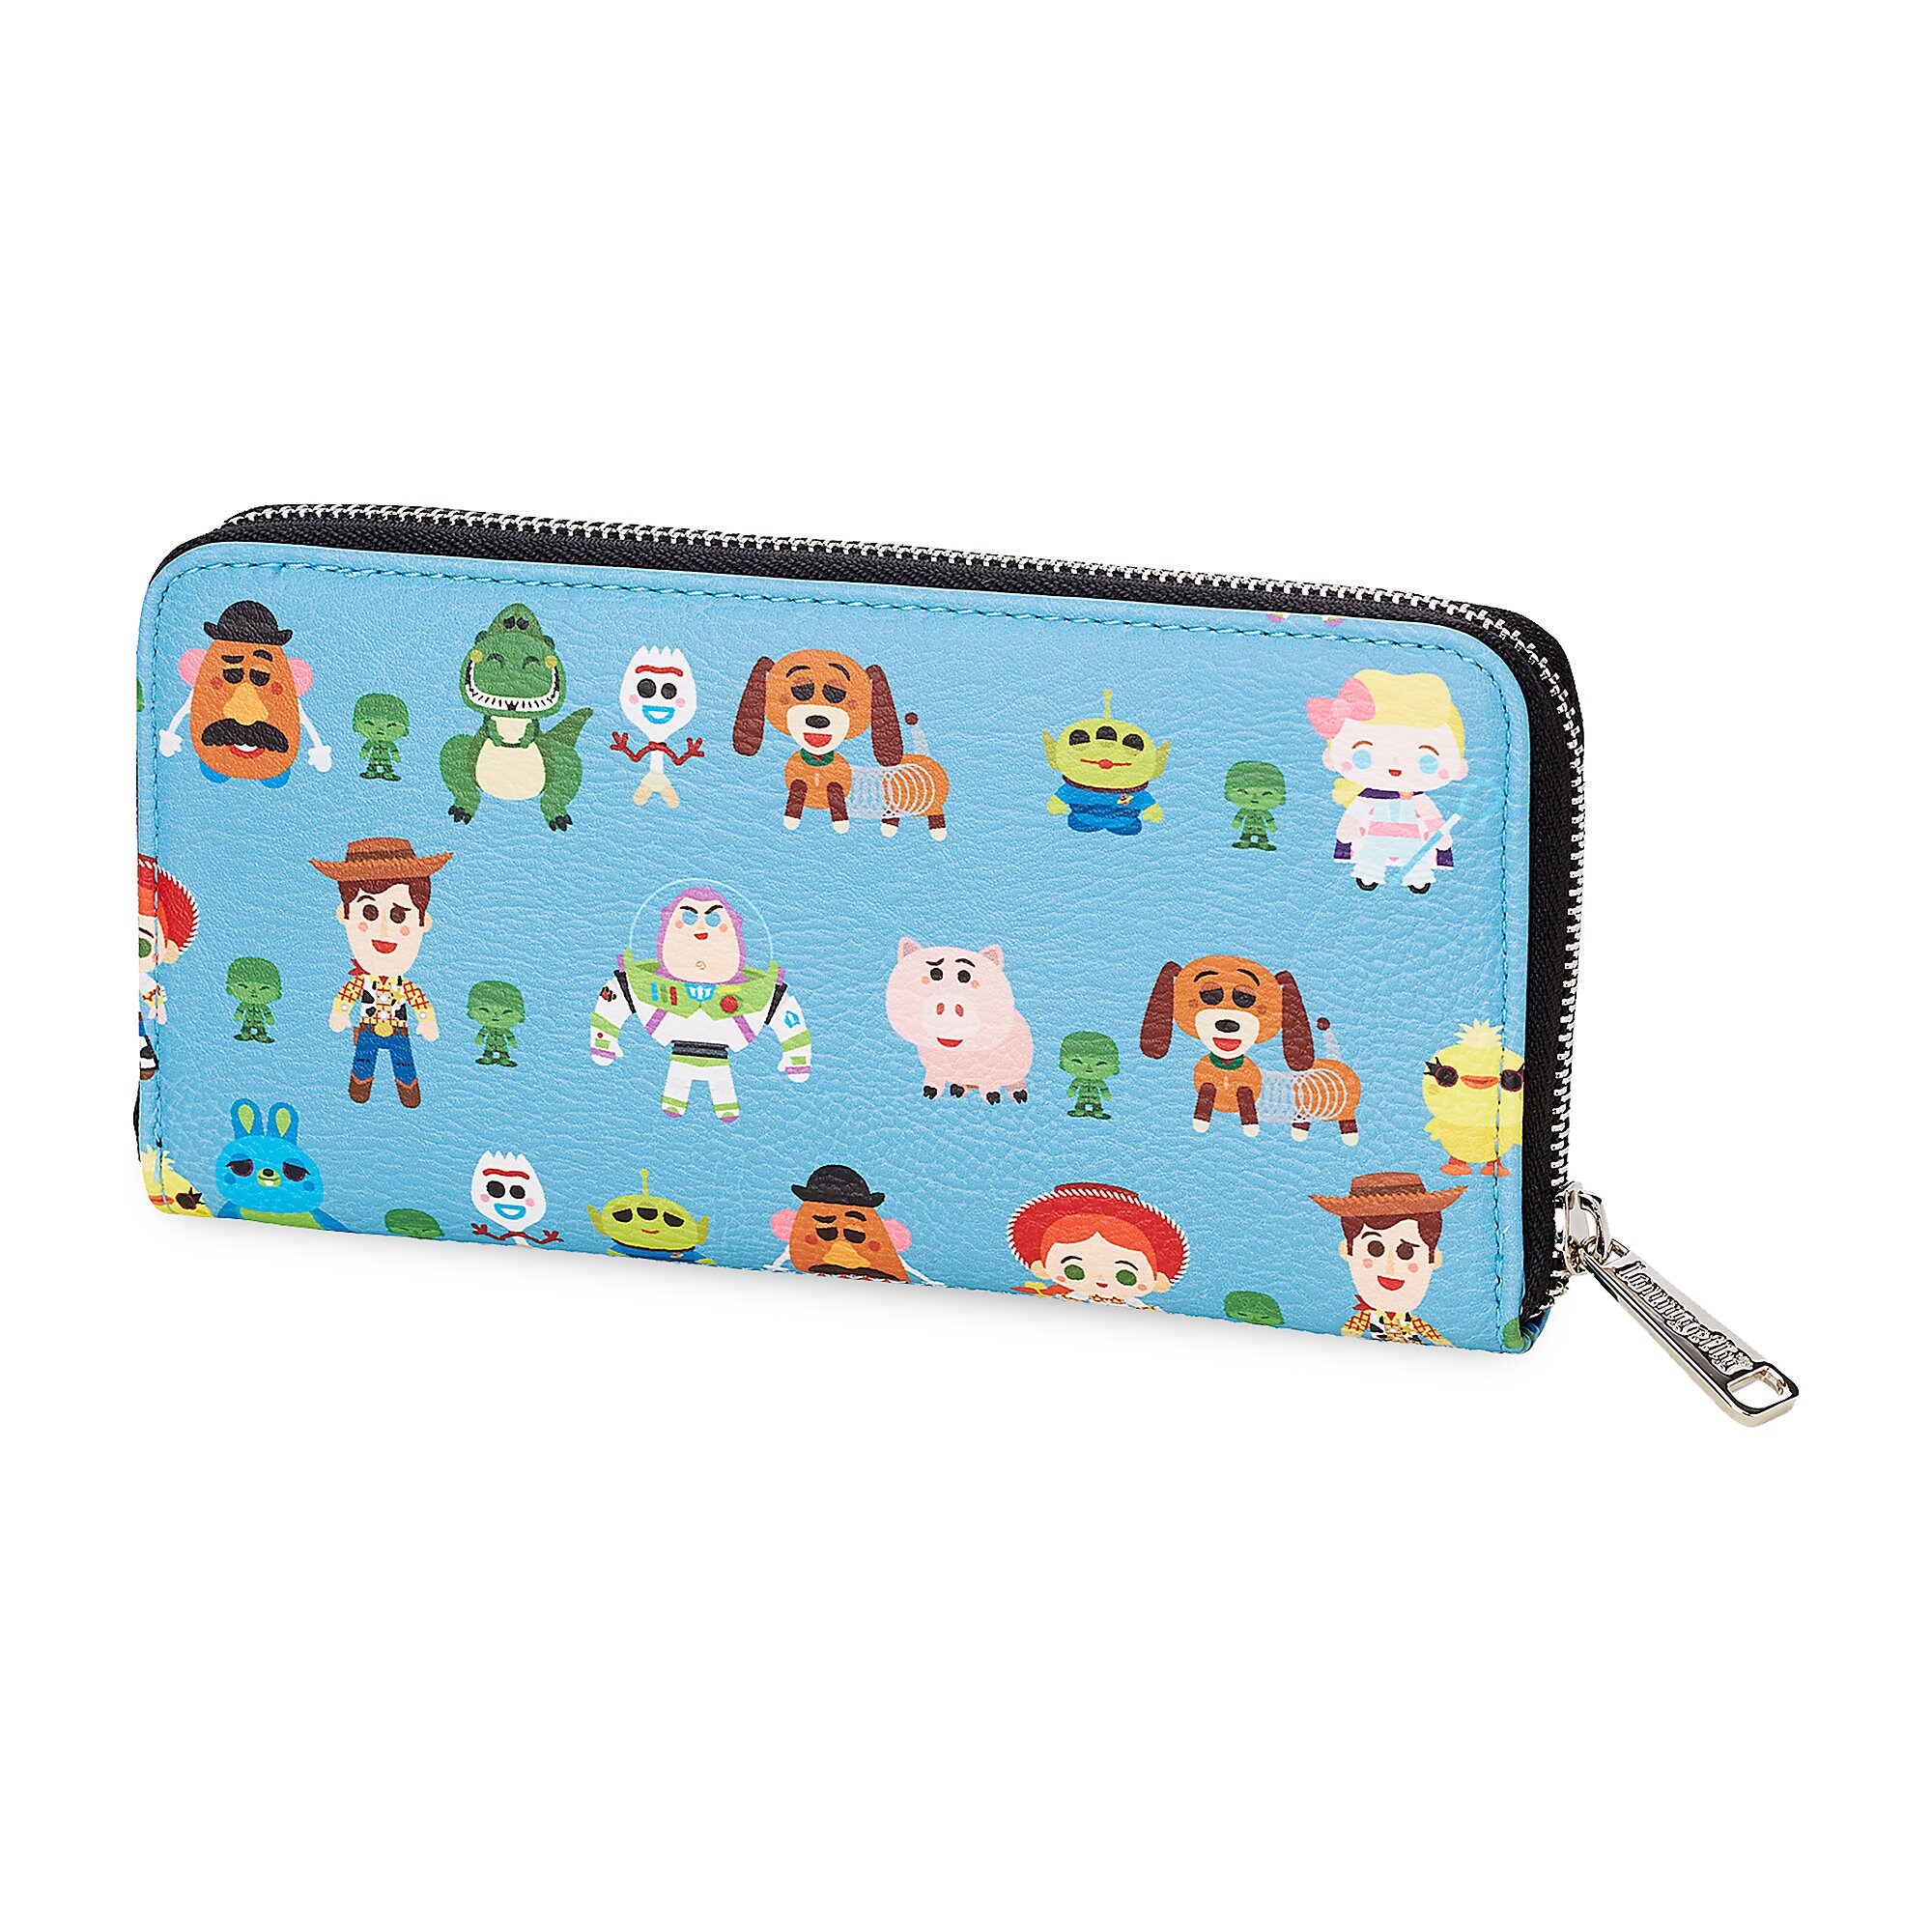 Toy Story 4 Zip-Around Wallet by Loungefly